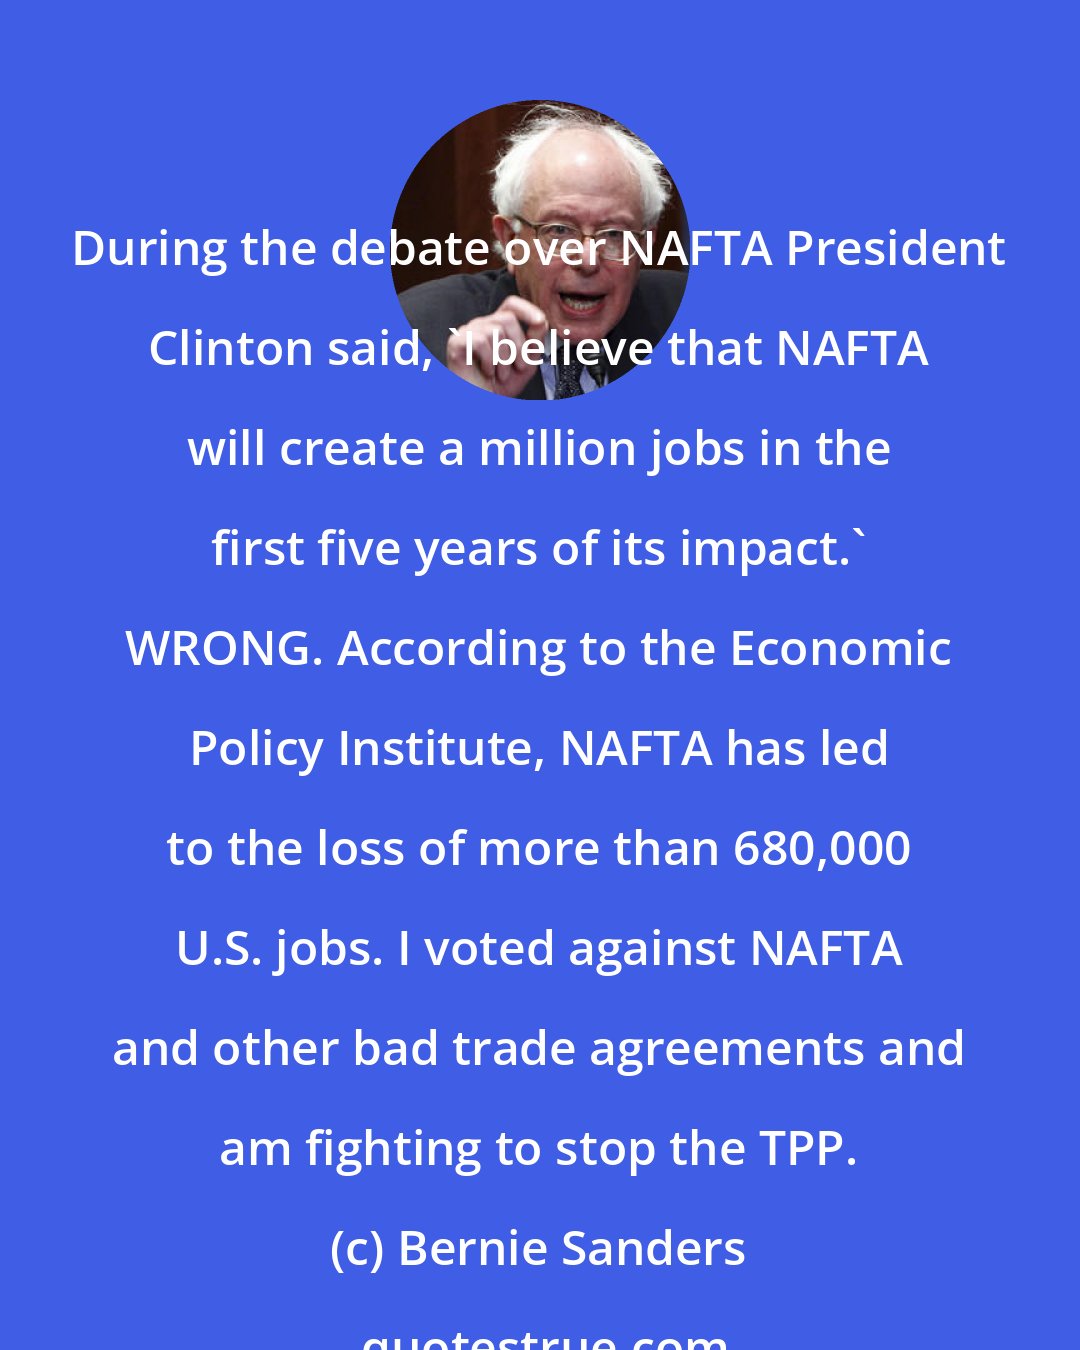 Bernie Sanders: During the debate over NAFTA President Clinton said, 'I believe that NAFTA will create a million jobs in the first five years of its impact.' WRONG. According to the Economic Policy Institute, NAFTA has led to the loss of more than 680,000 U.S. jobs. I voted against NAFTA and other bad trade agreements and am fighting to stop the TPP.